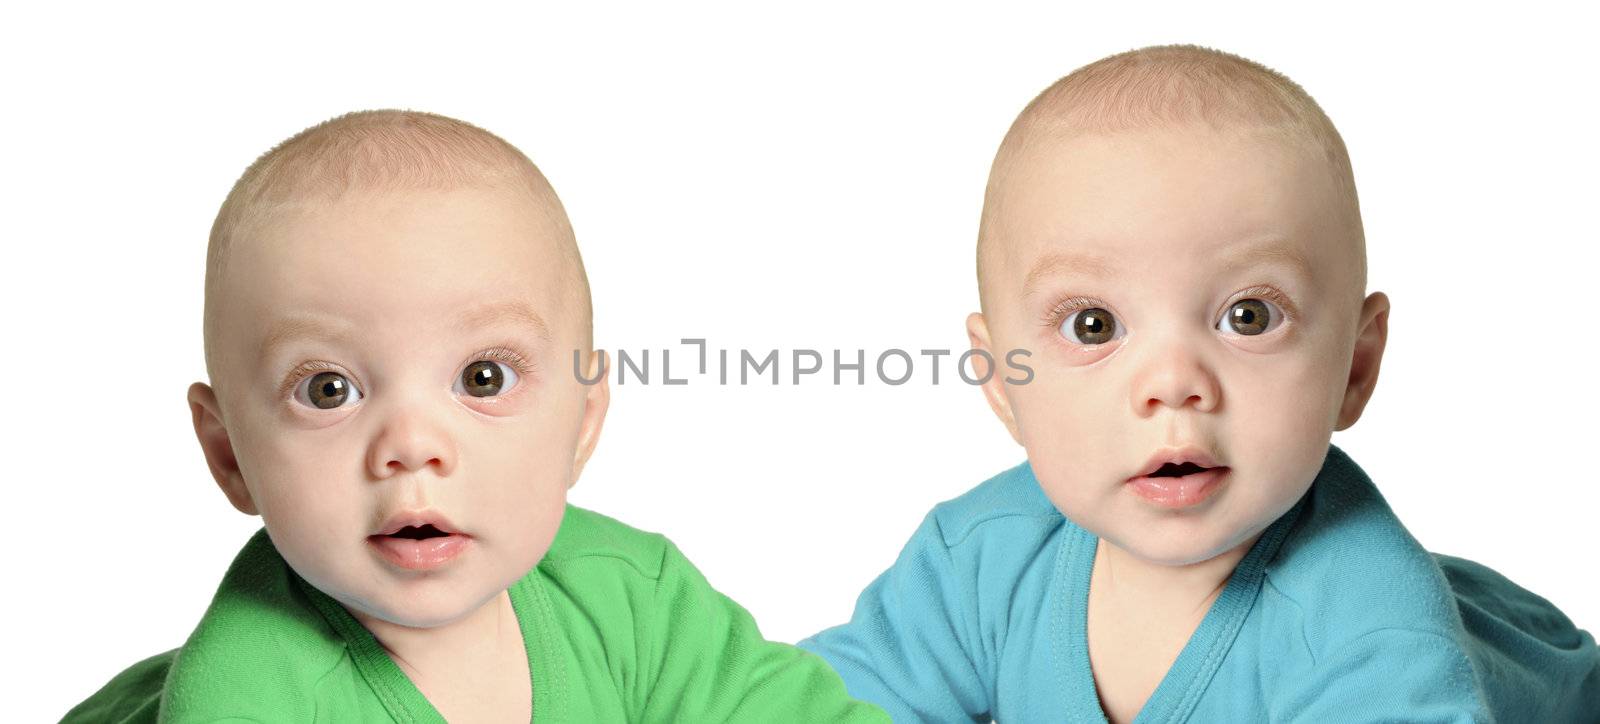 Twin baby boys in blue and green by tish1